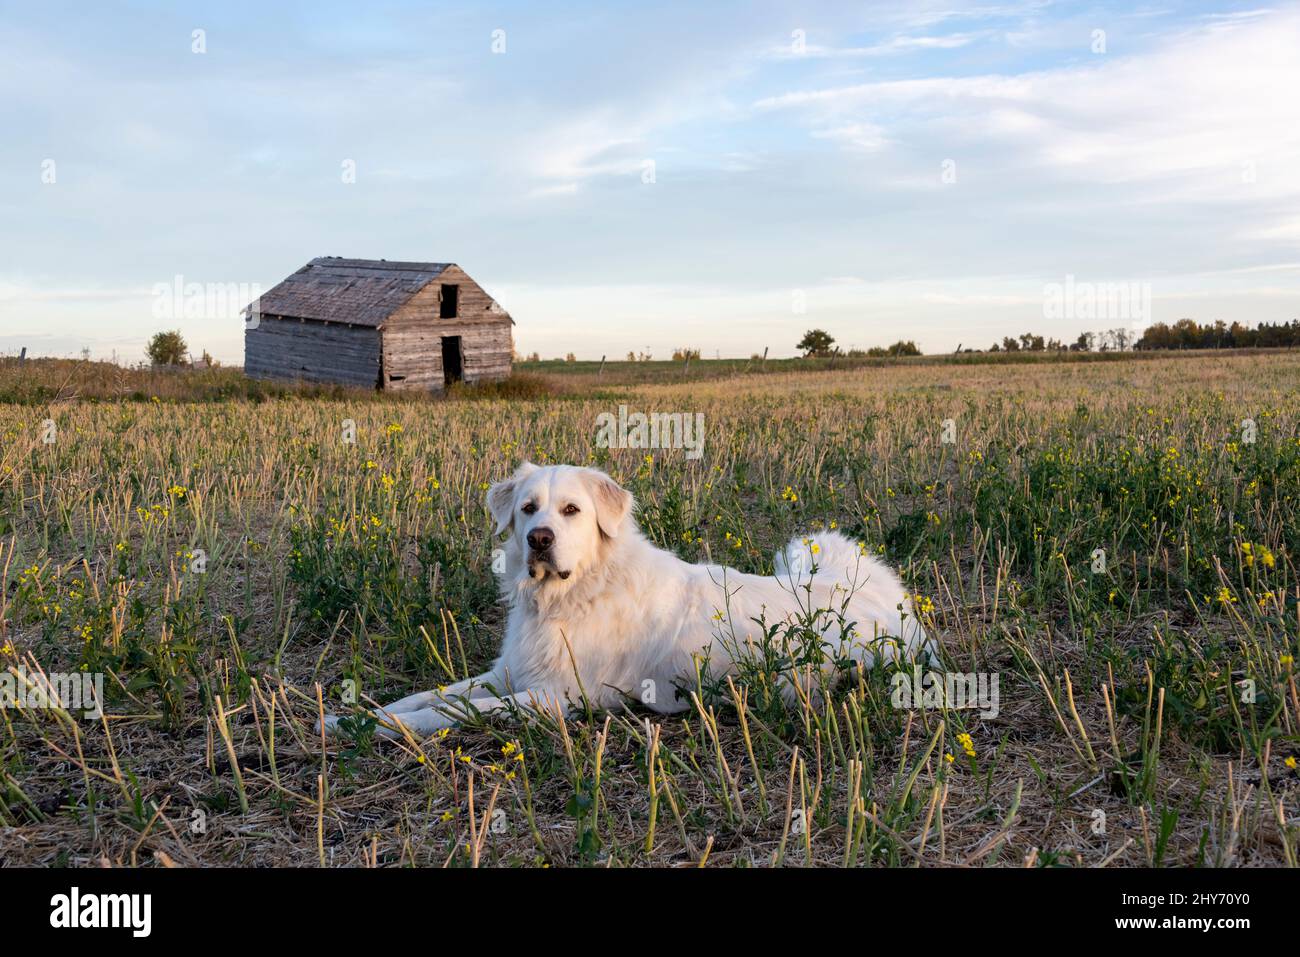 Male Great Pyrenees mountain dog resting in a field in front of an agricultural granary. Stock Photo